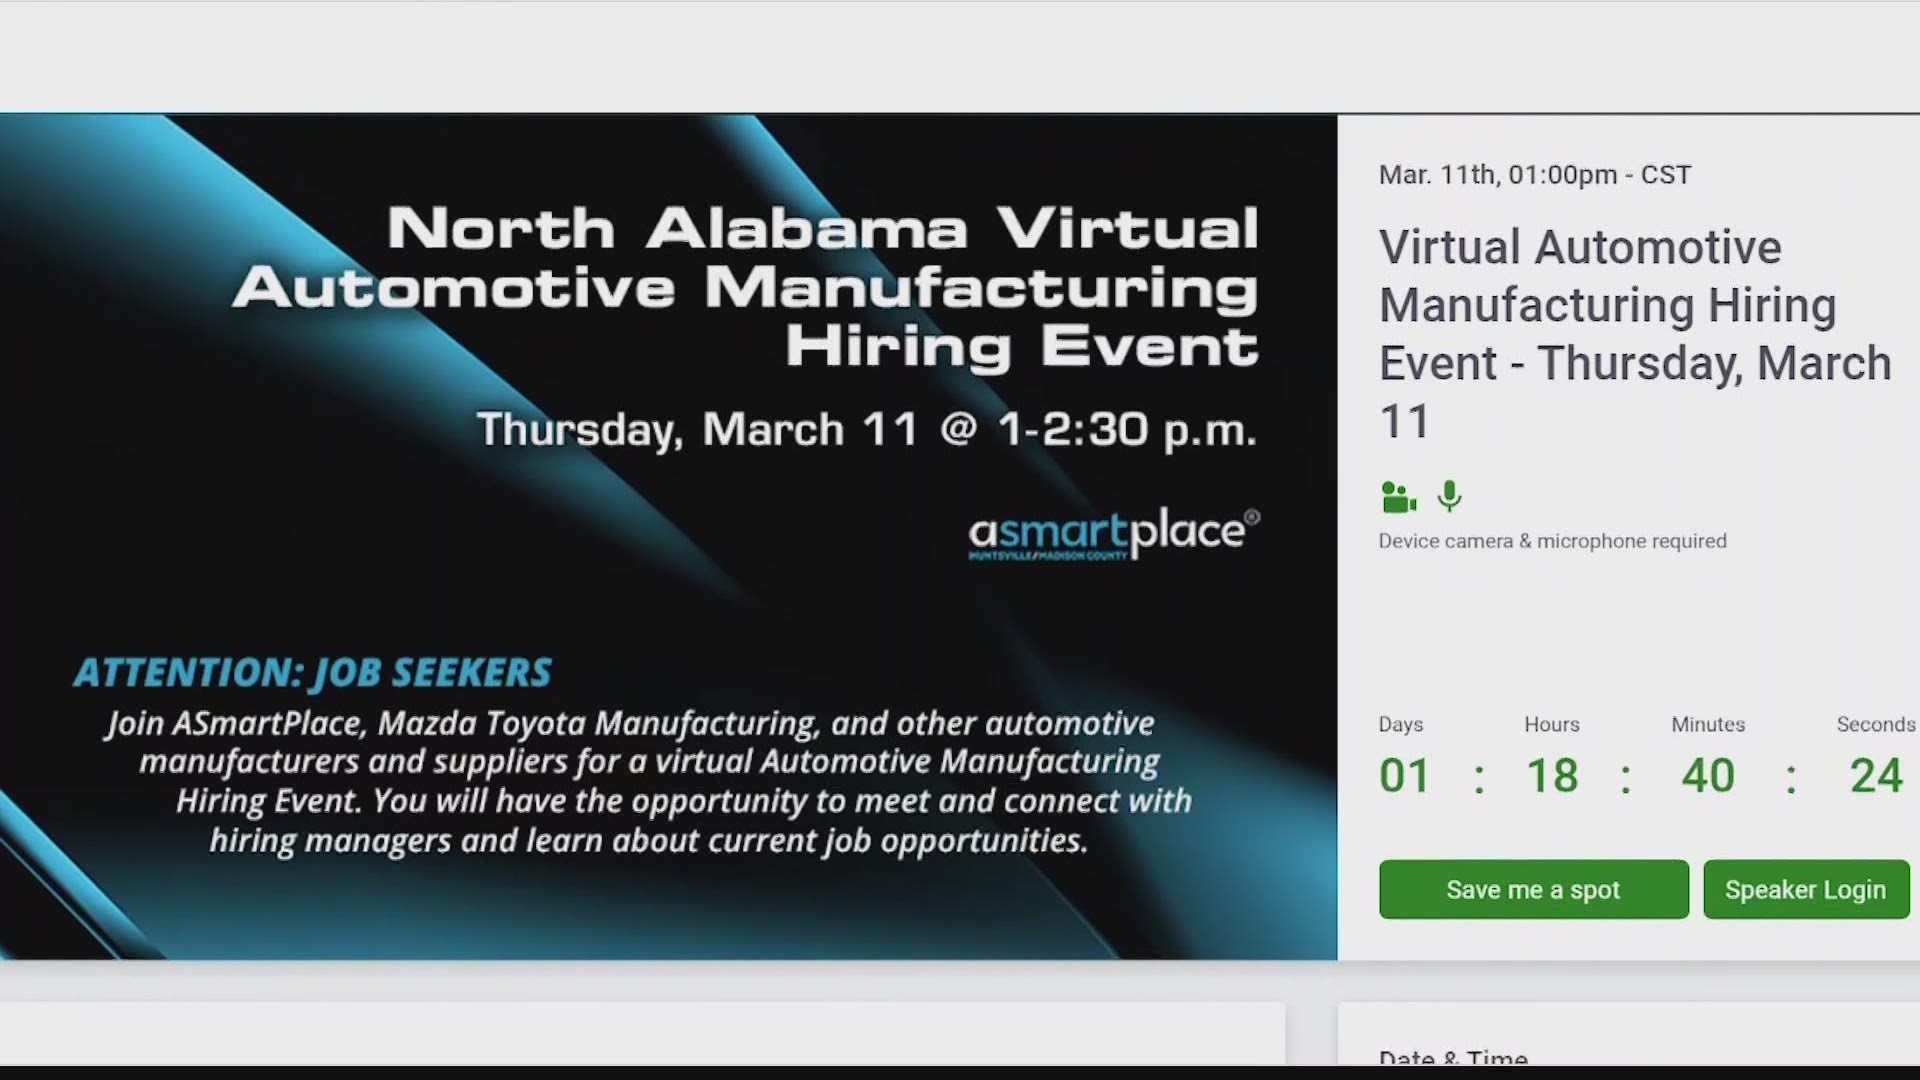 Huntsville-Madison County Chamber of Commerce & MTM will team up to host a virtual automotive hiring event this Thursday.